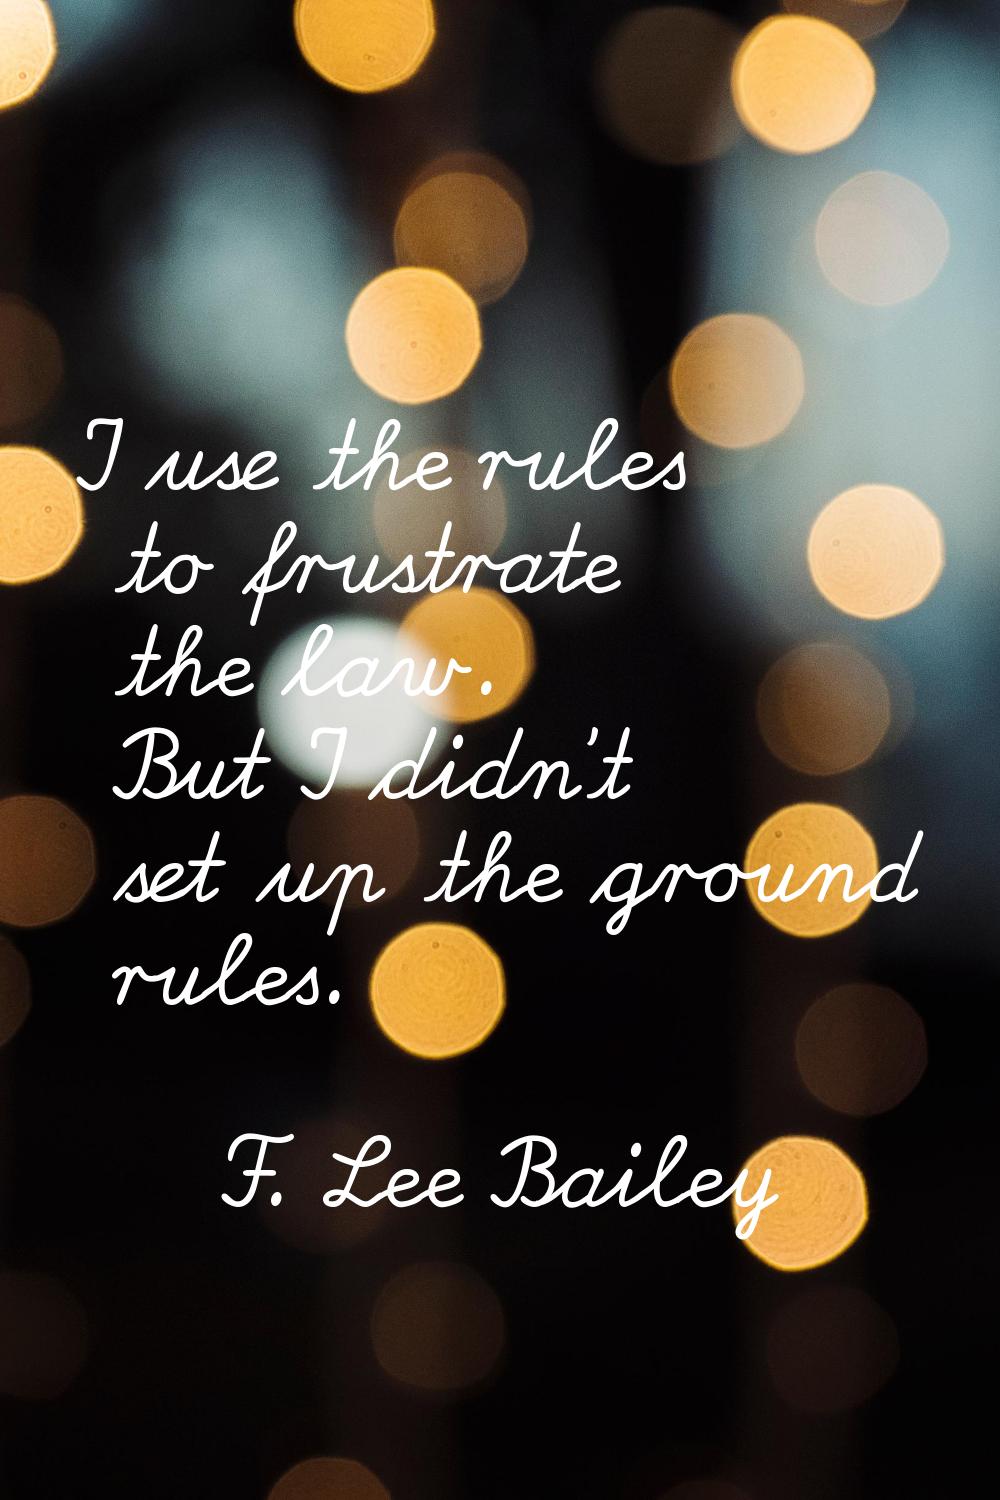 I use the rules to frustrate the law. But I didn't set up the ground rules.